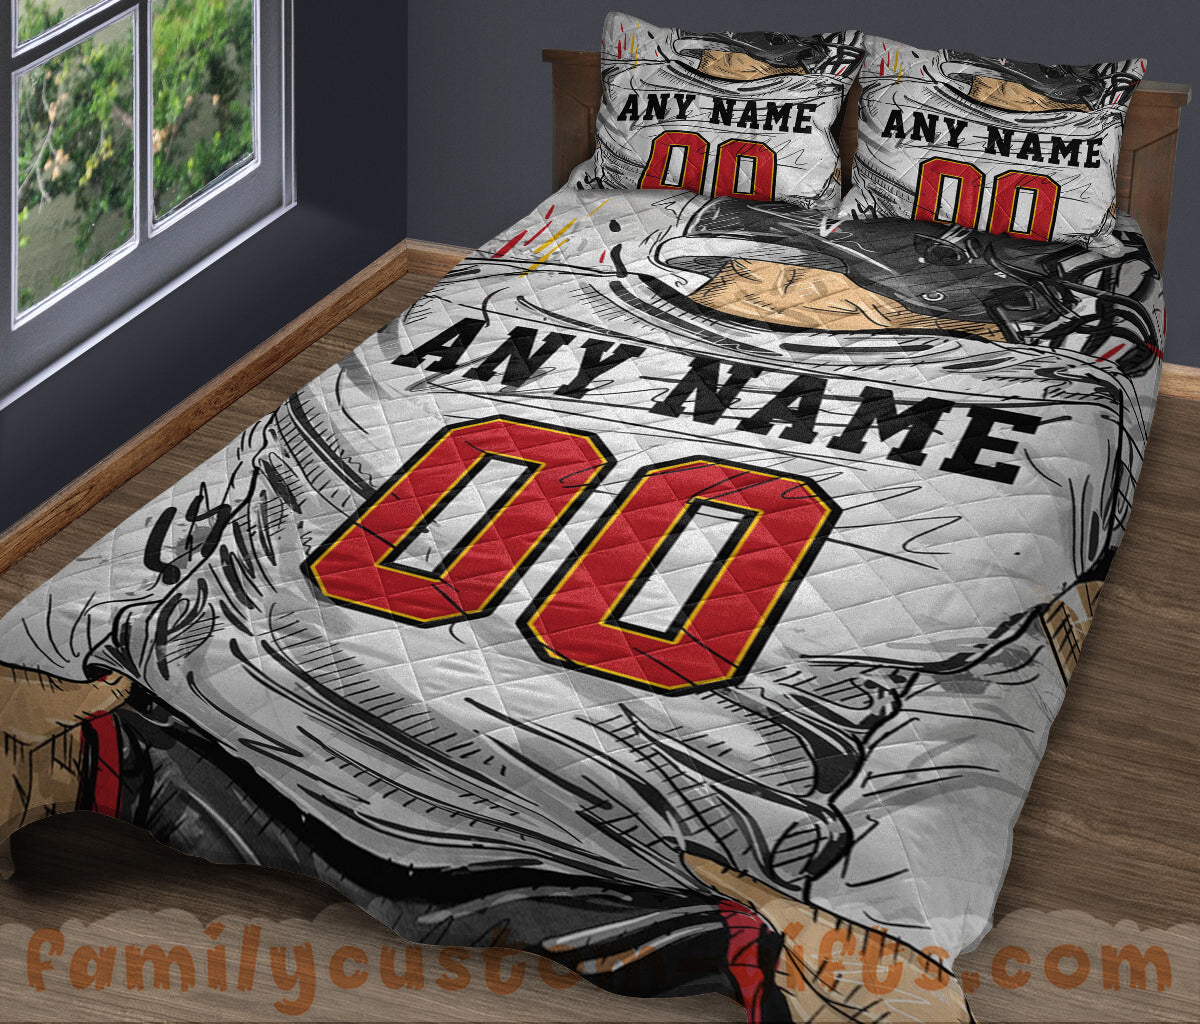 Custom Quilt Sets Tampa Bay Jersey Personalized Football Premium Quilt Bedding for Men Women